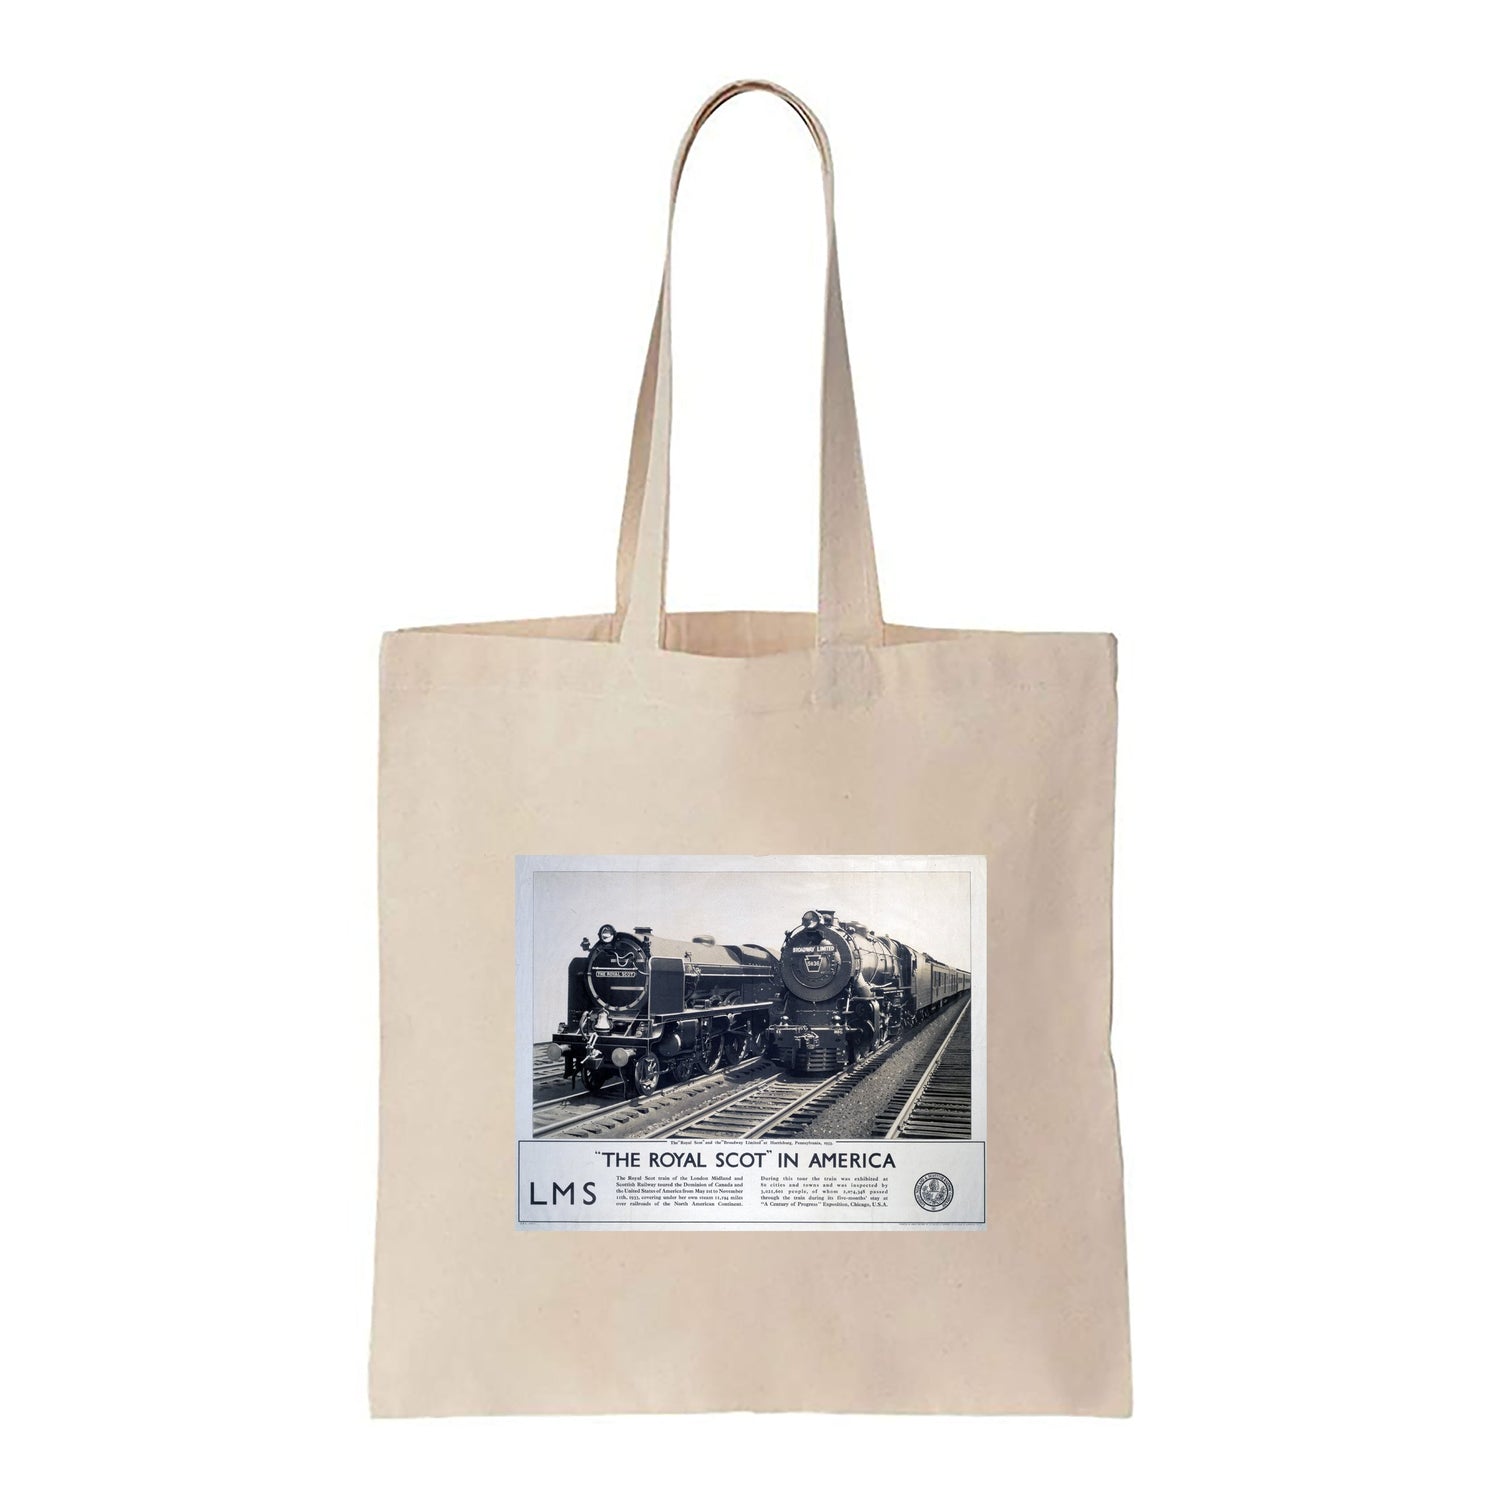 The Royal Scot In America, LMS - Canvas Tote Bag